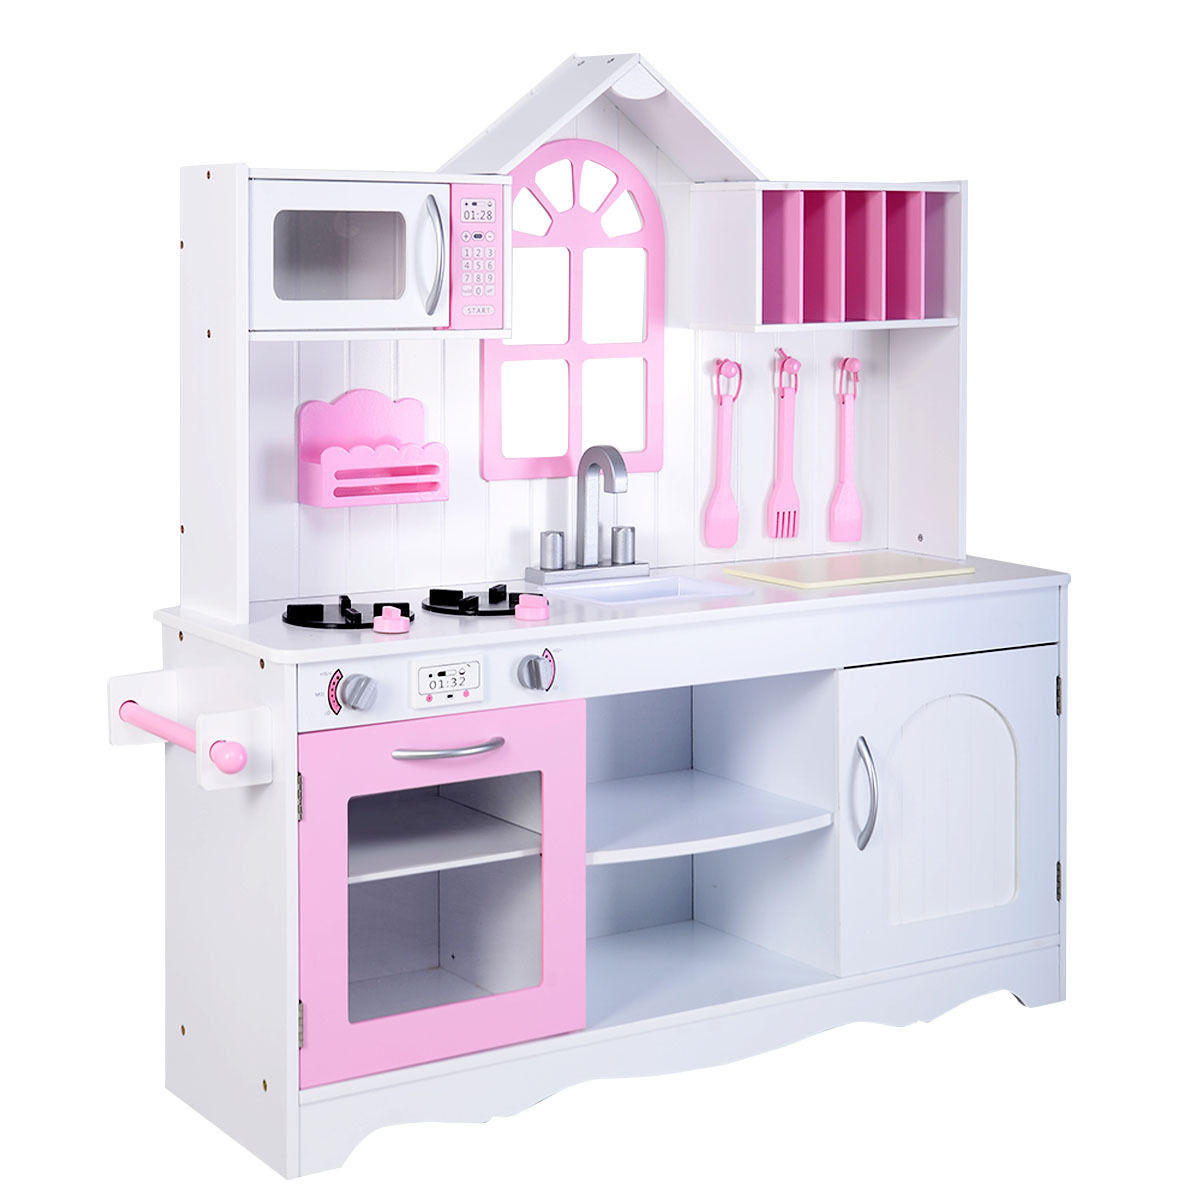 wooden toy kitchens for toddlers